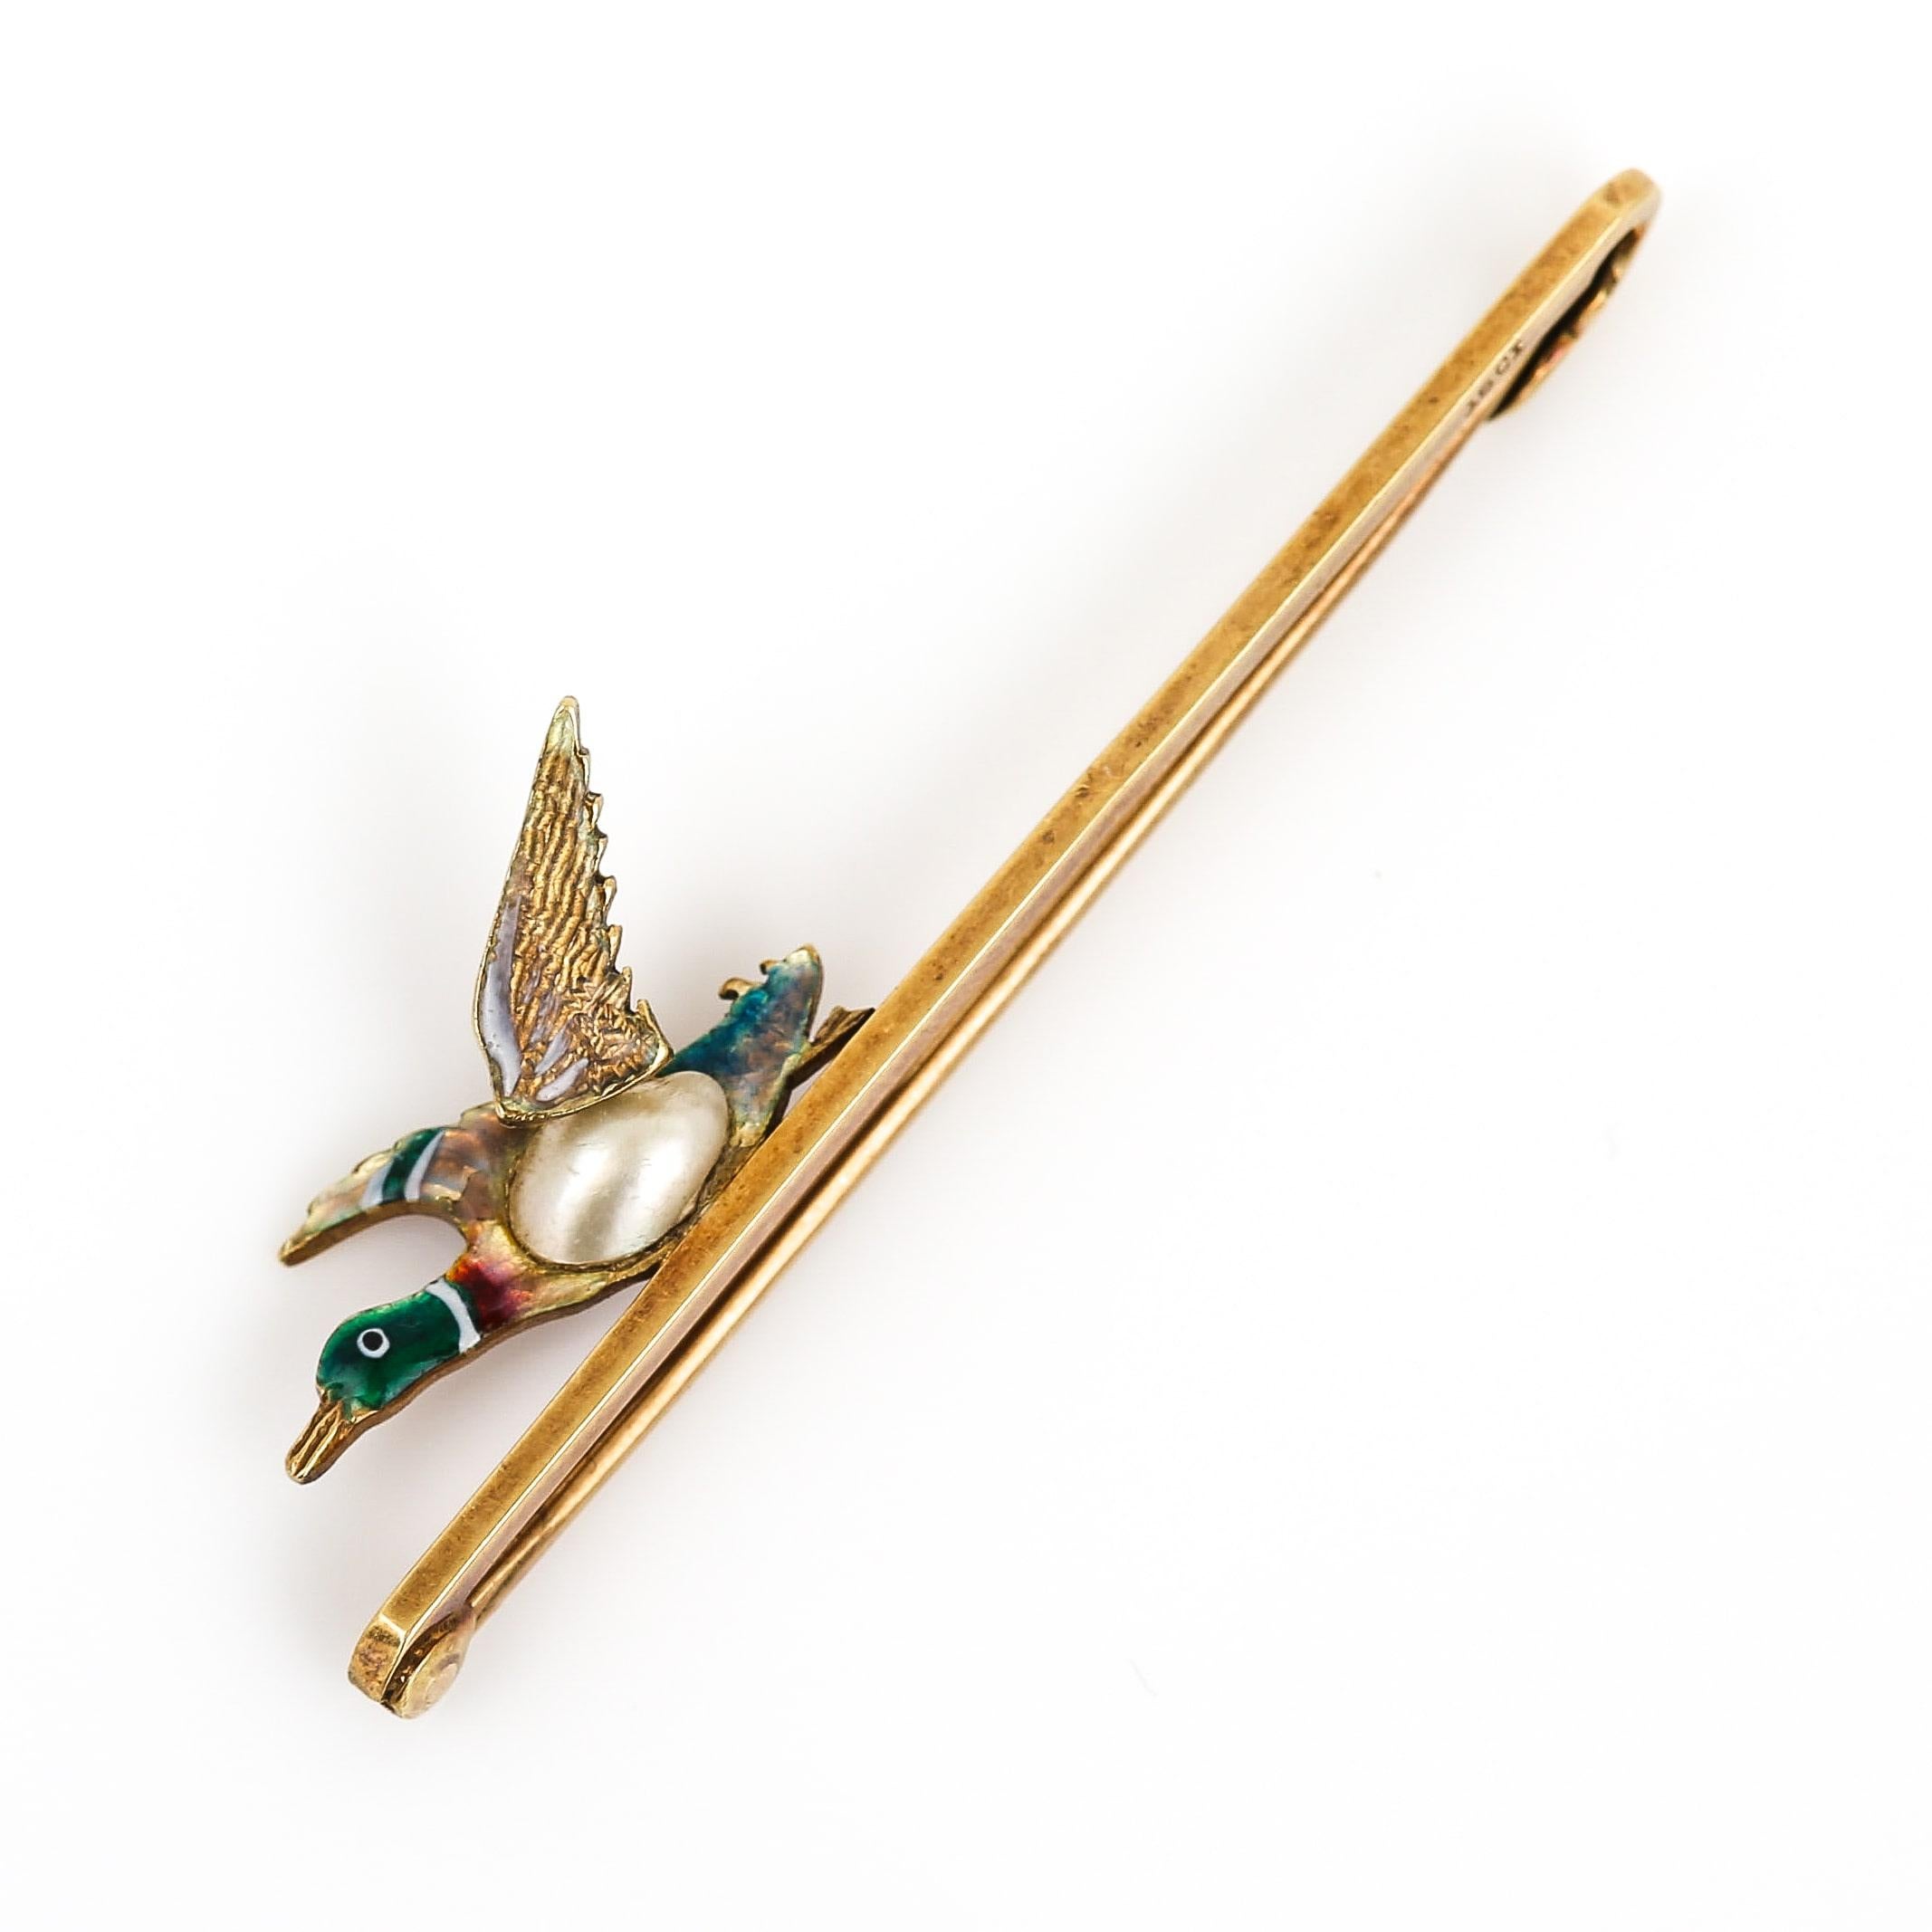 A beautiful Victorian 15ct yellow gold duck bar brooch. The duck is delicately and masterfully enamelled in a variety of colours, this remains mostly intact. The body of the brooch is made from half a Baroque pearl with a creamy lustre. A fantastic